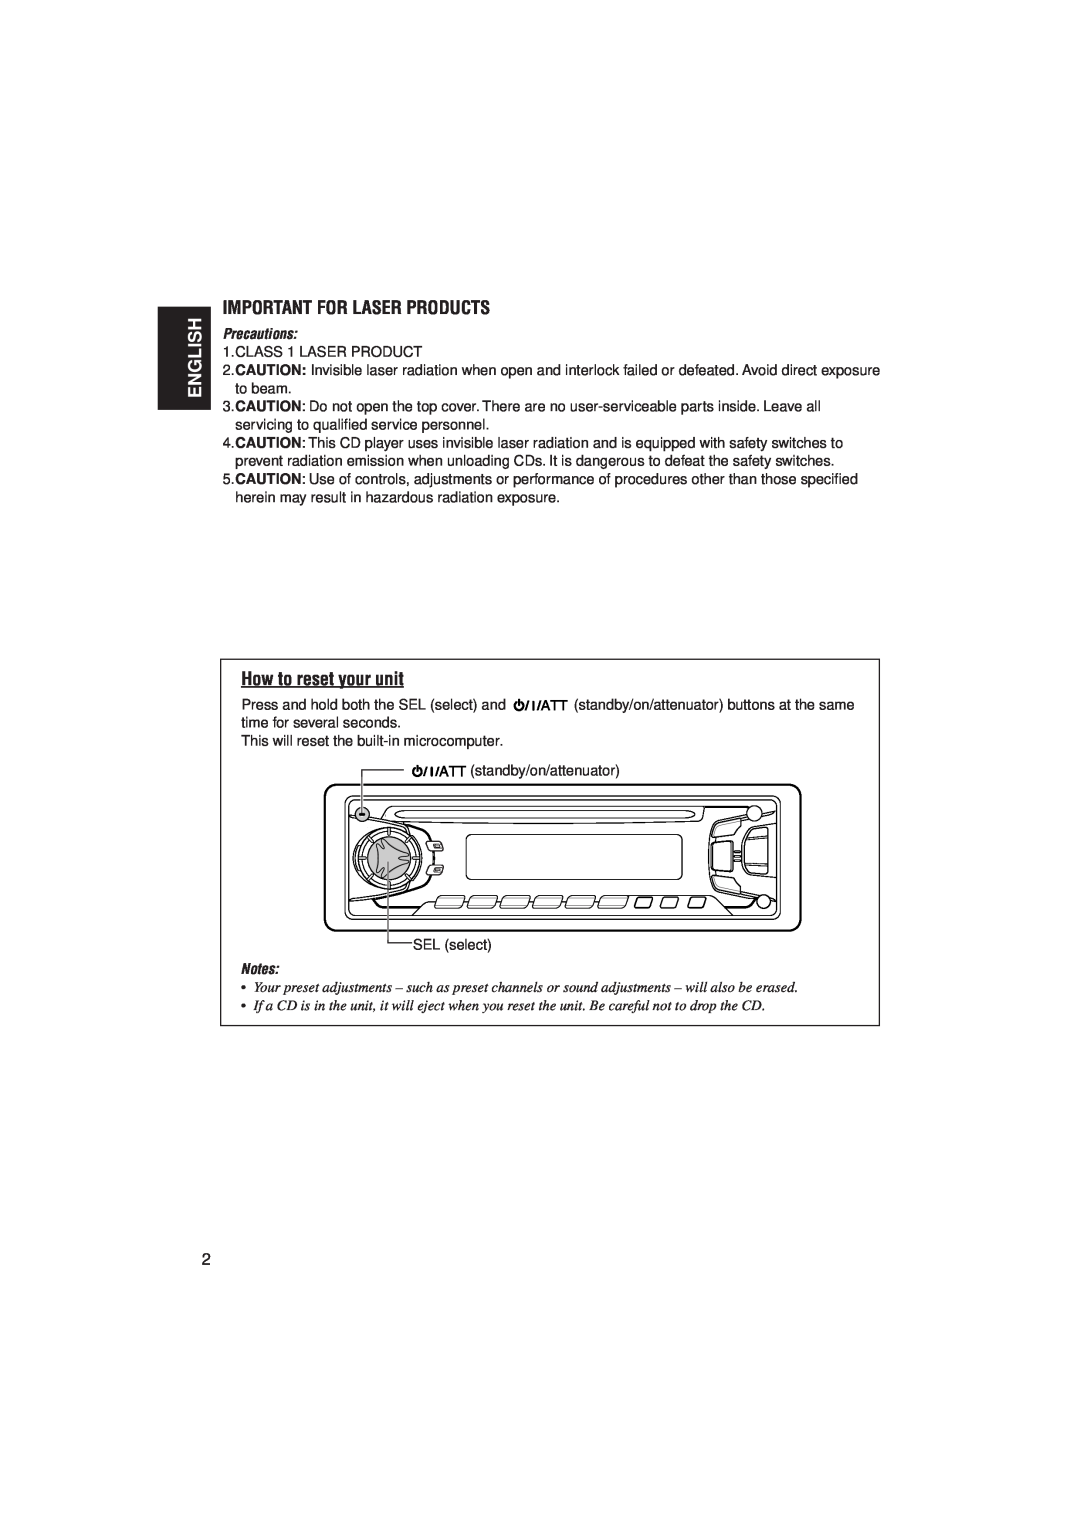 JVC KD-S785 manual Important For Laser Products, How to reset your unit, Precautions, English 